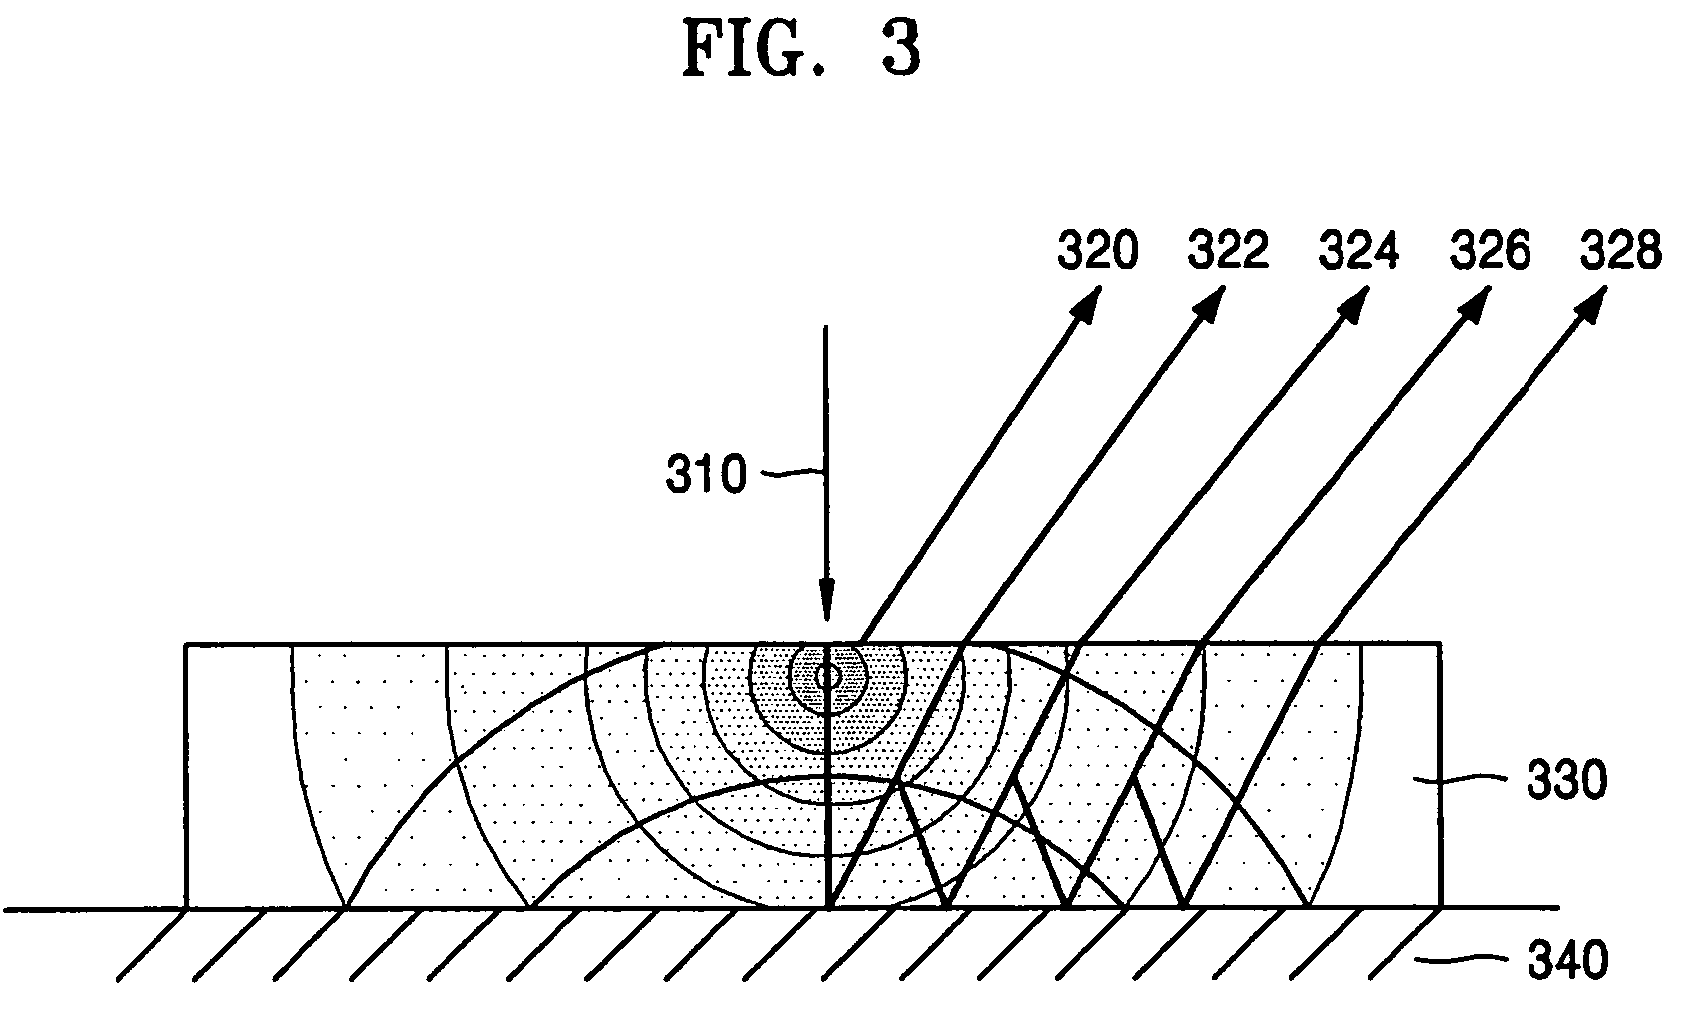 Apparatus and method for measuring blood component using light trans-reflectance